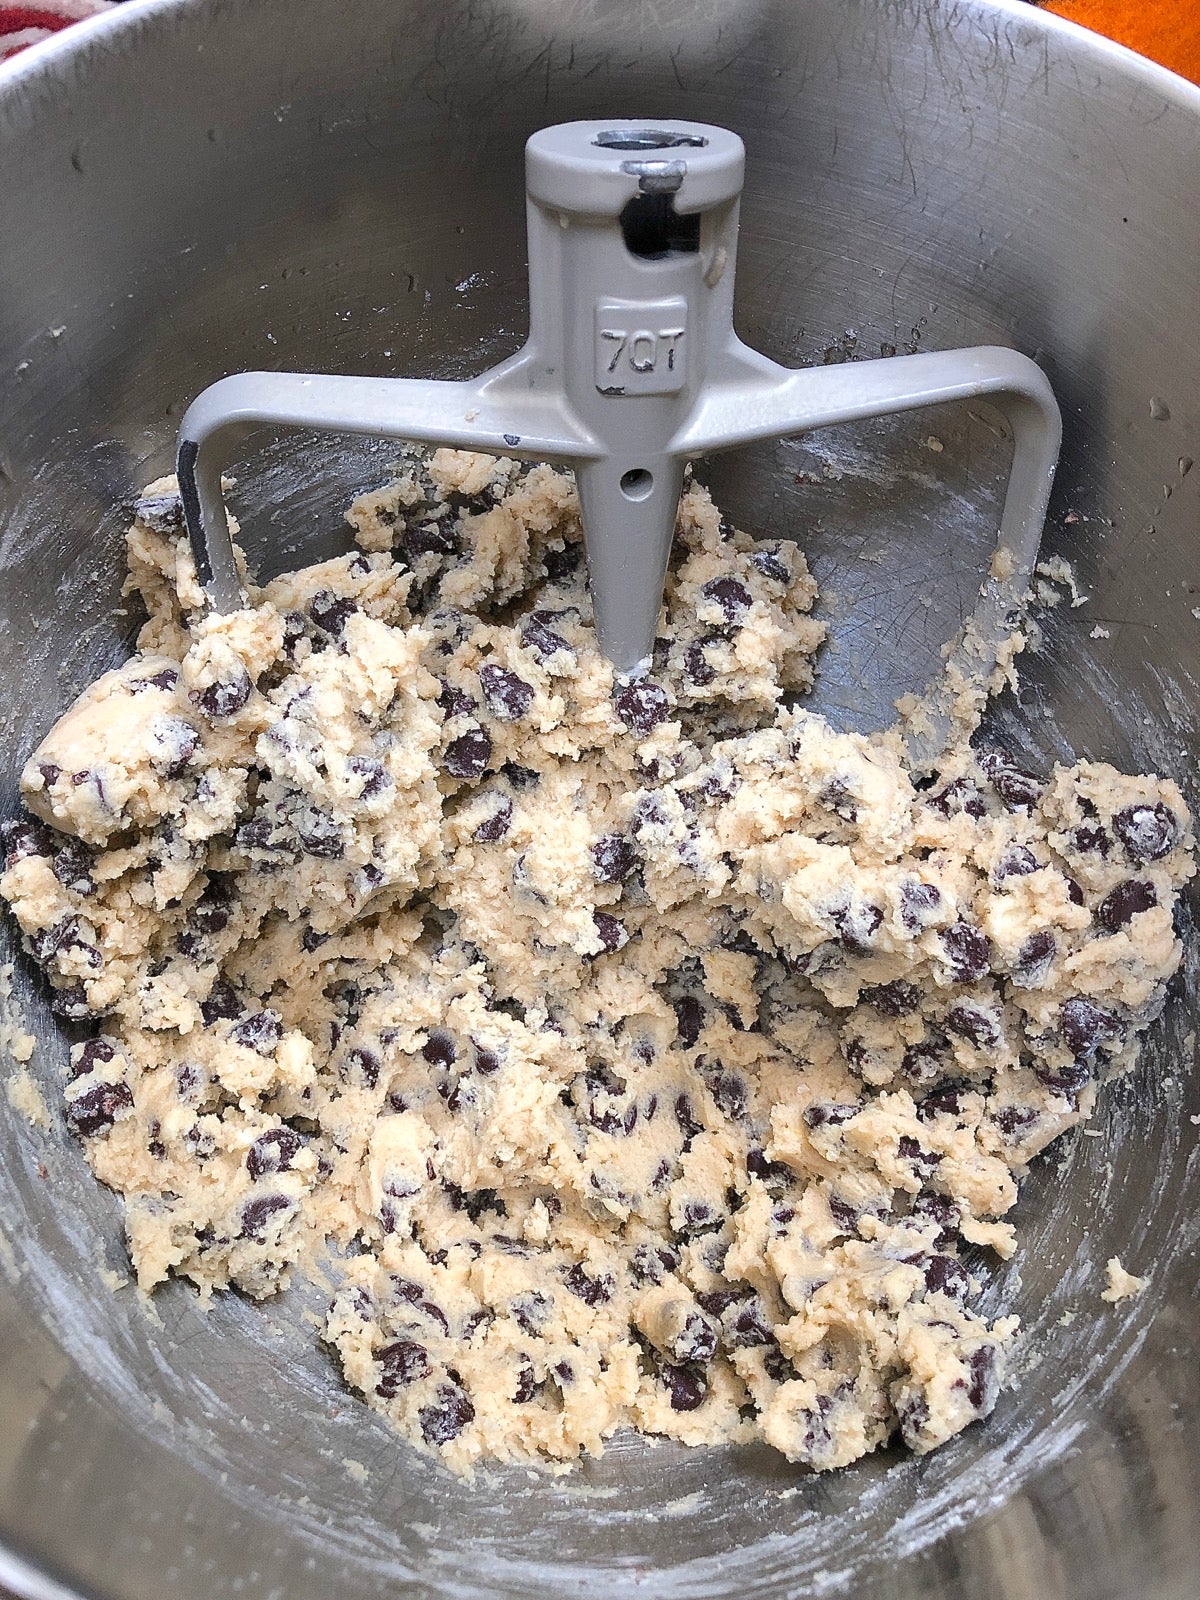 https://www.kingarthurbaking.com/sites/default/files/inline-images/Scraping%20the%20mixing%20bowl-6.jpg